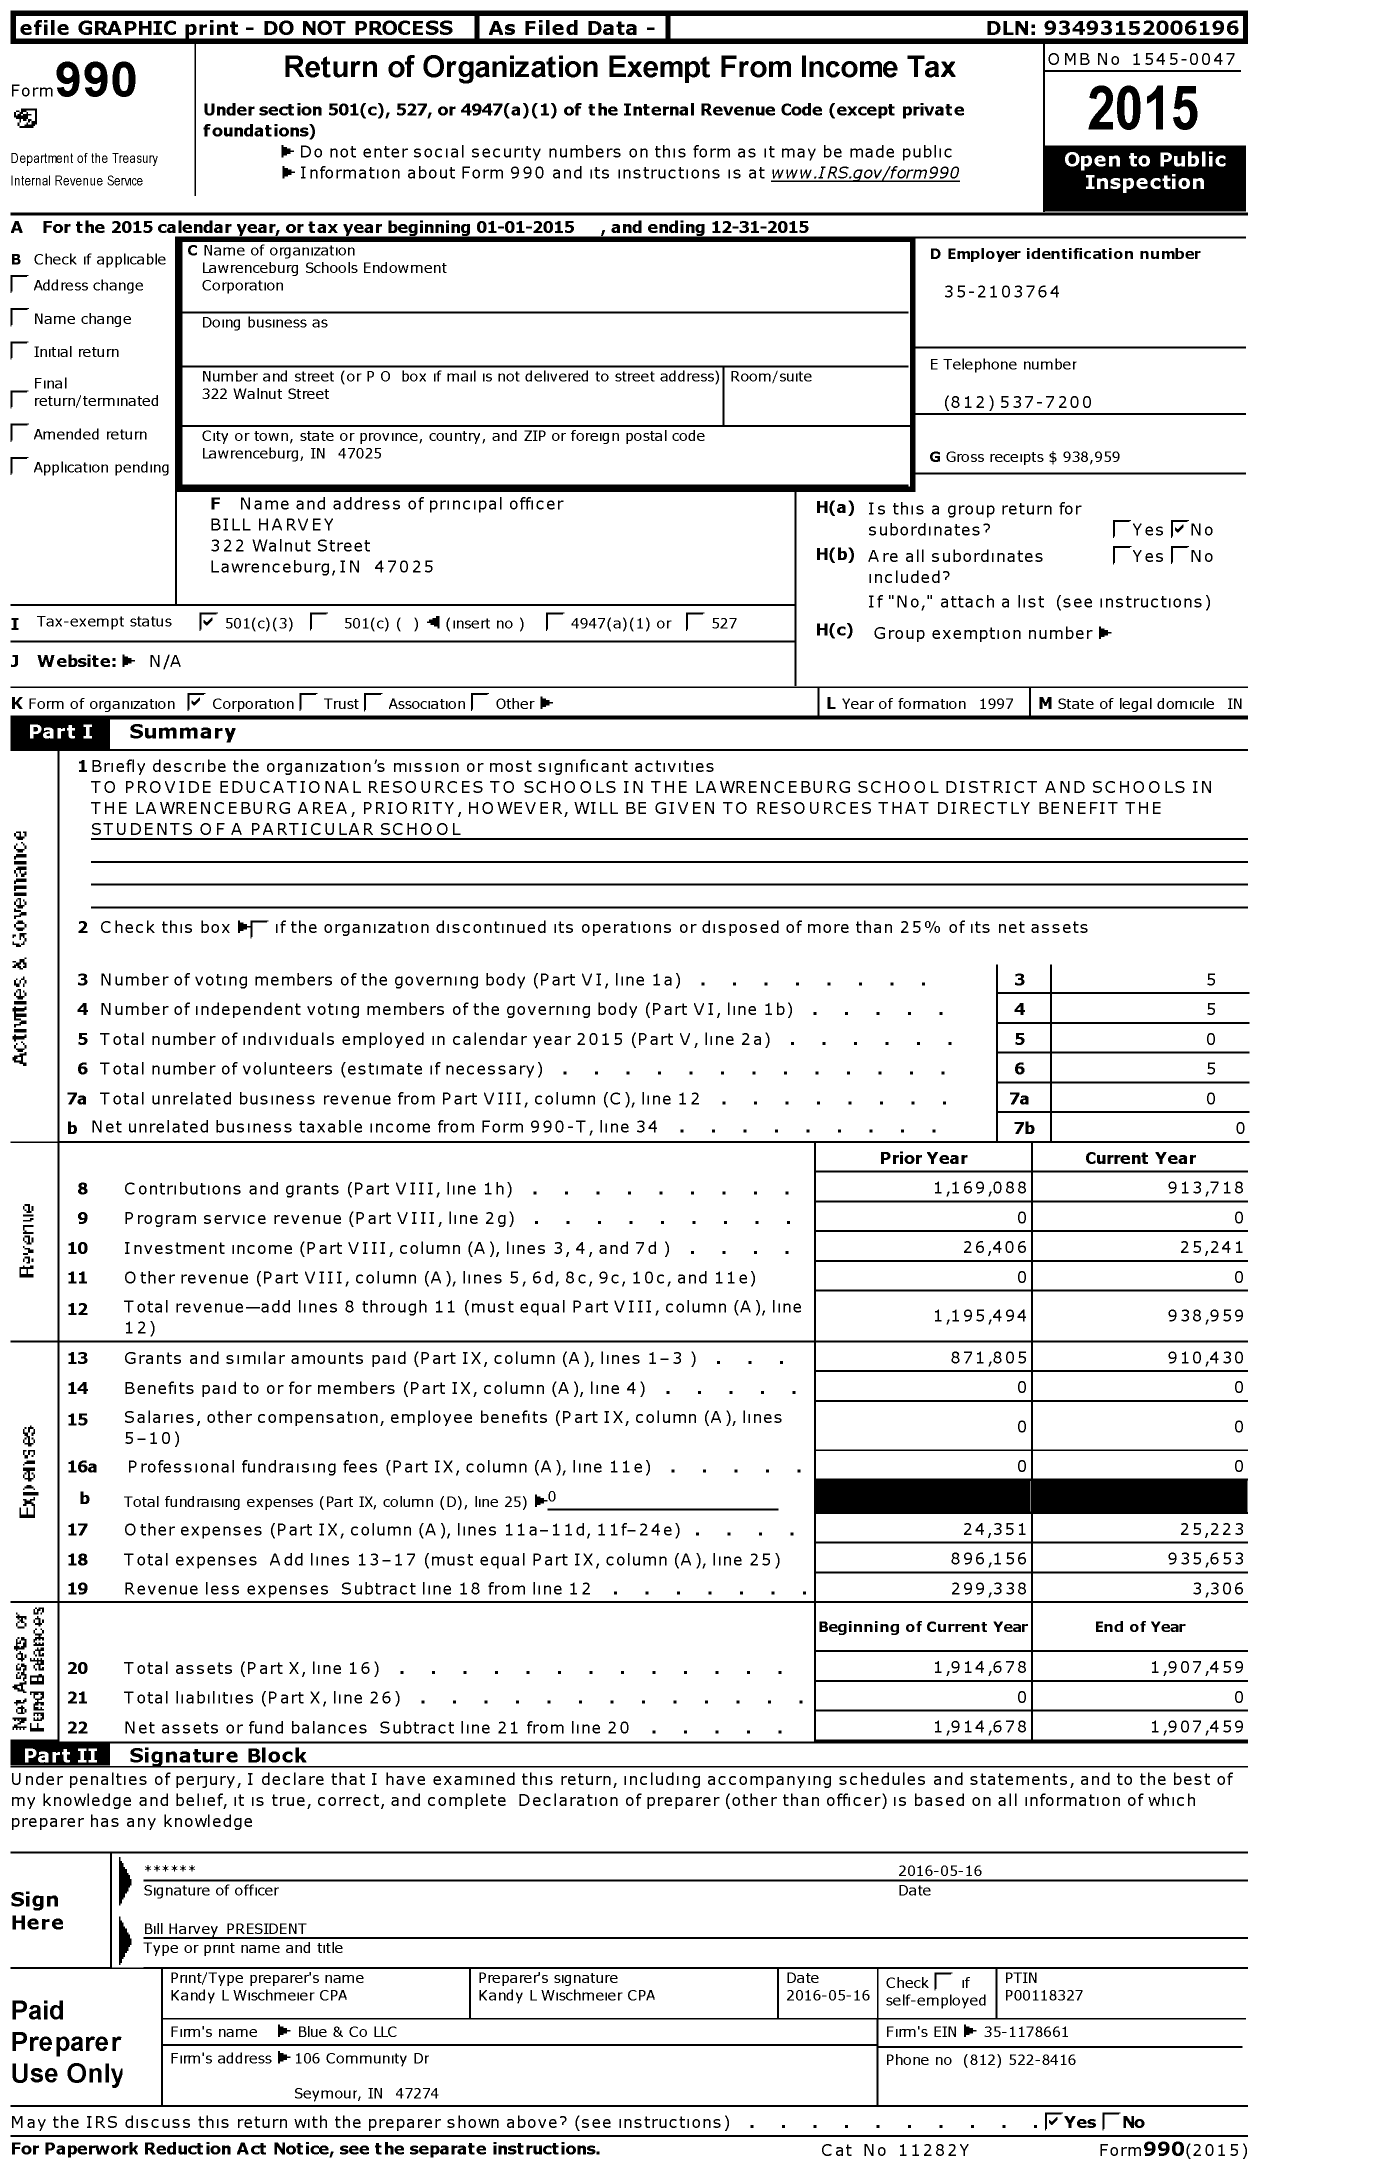 Image of first page of 2015 Form 990 for Lawrenceburg Schools Endowment Corporation